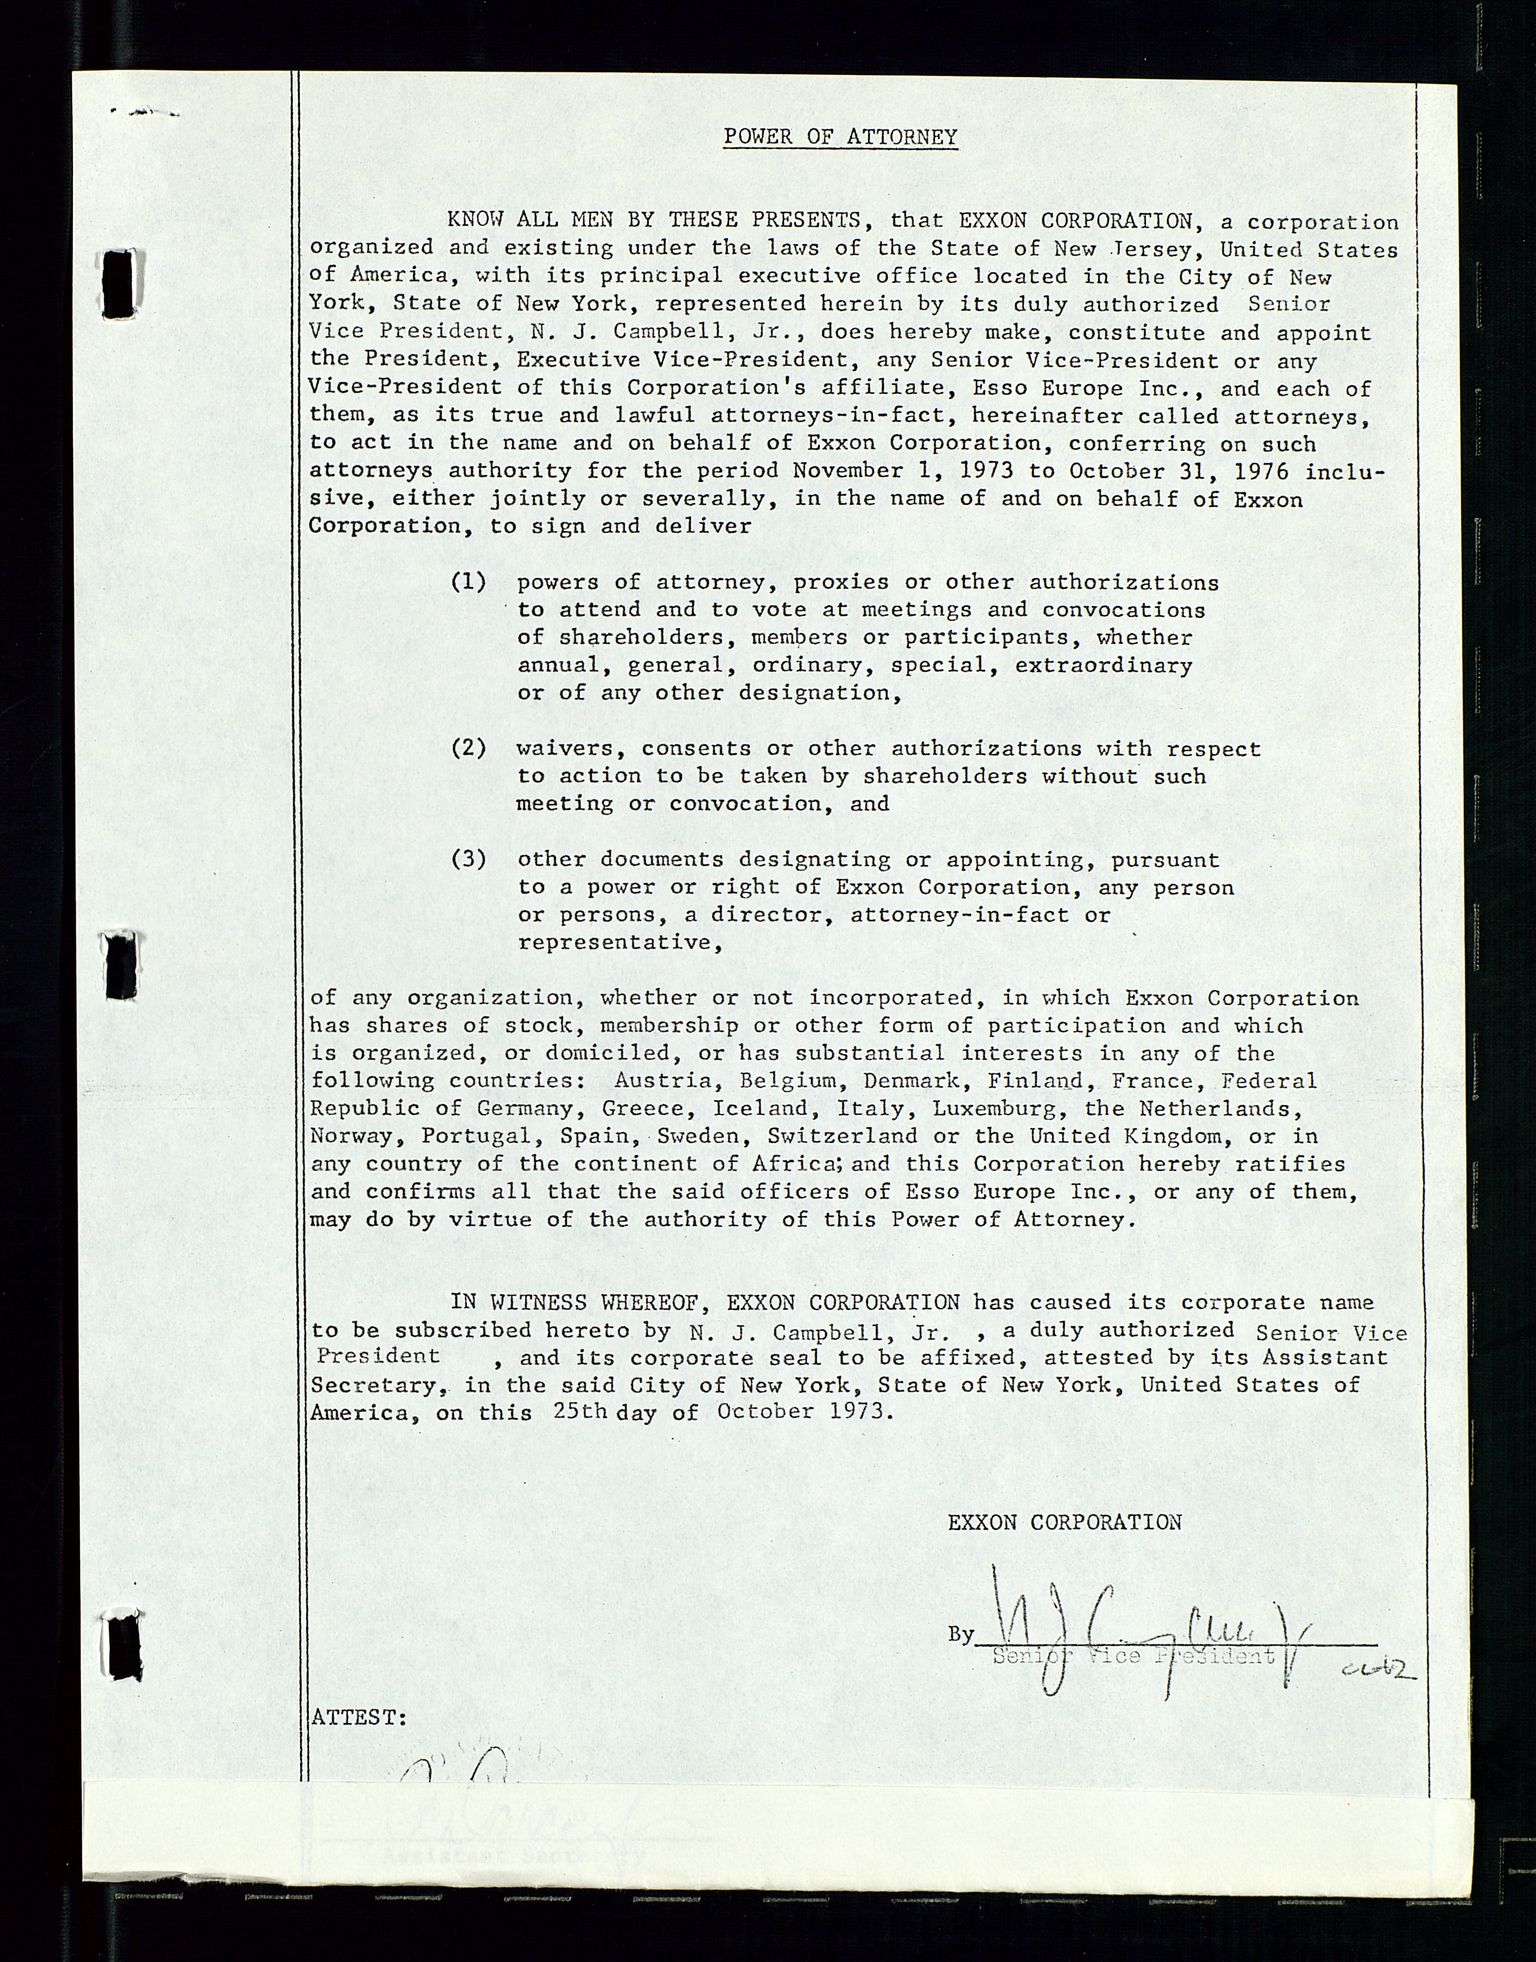 Pa 1512 - Esso Exploration and Production Norway Inc., SAST/A-101917/A/Aa/L0001/0002: Styredokumenter / Corporate records, Board meeting minutes, Agreements, Stocholder meetings, 1975-1979, s. 16